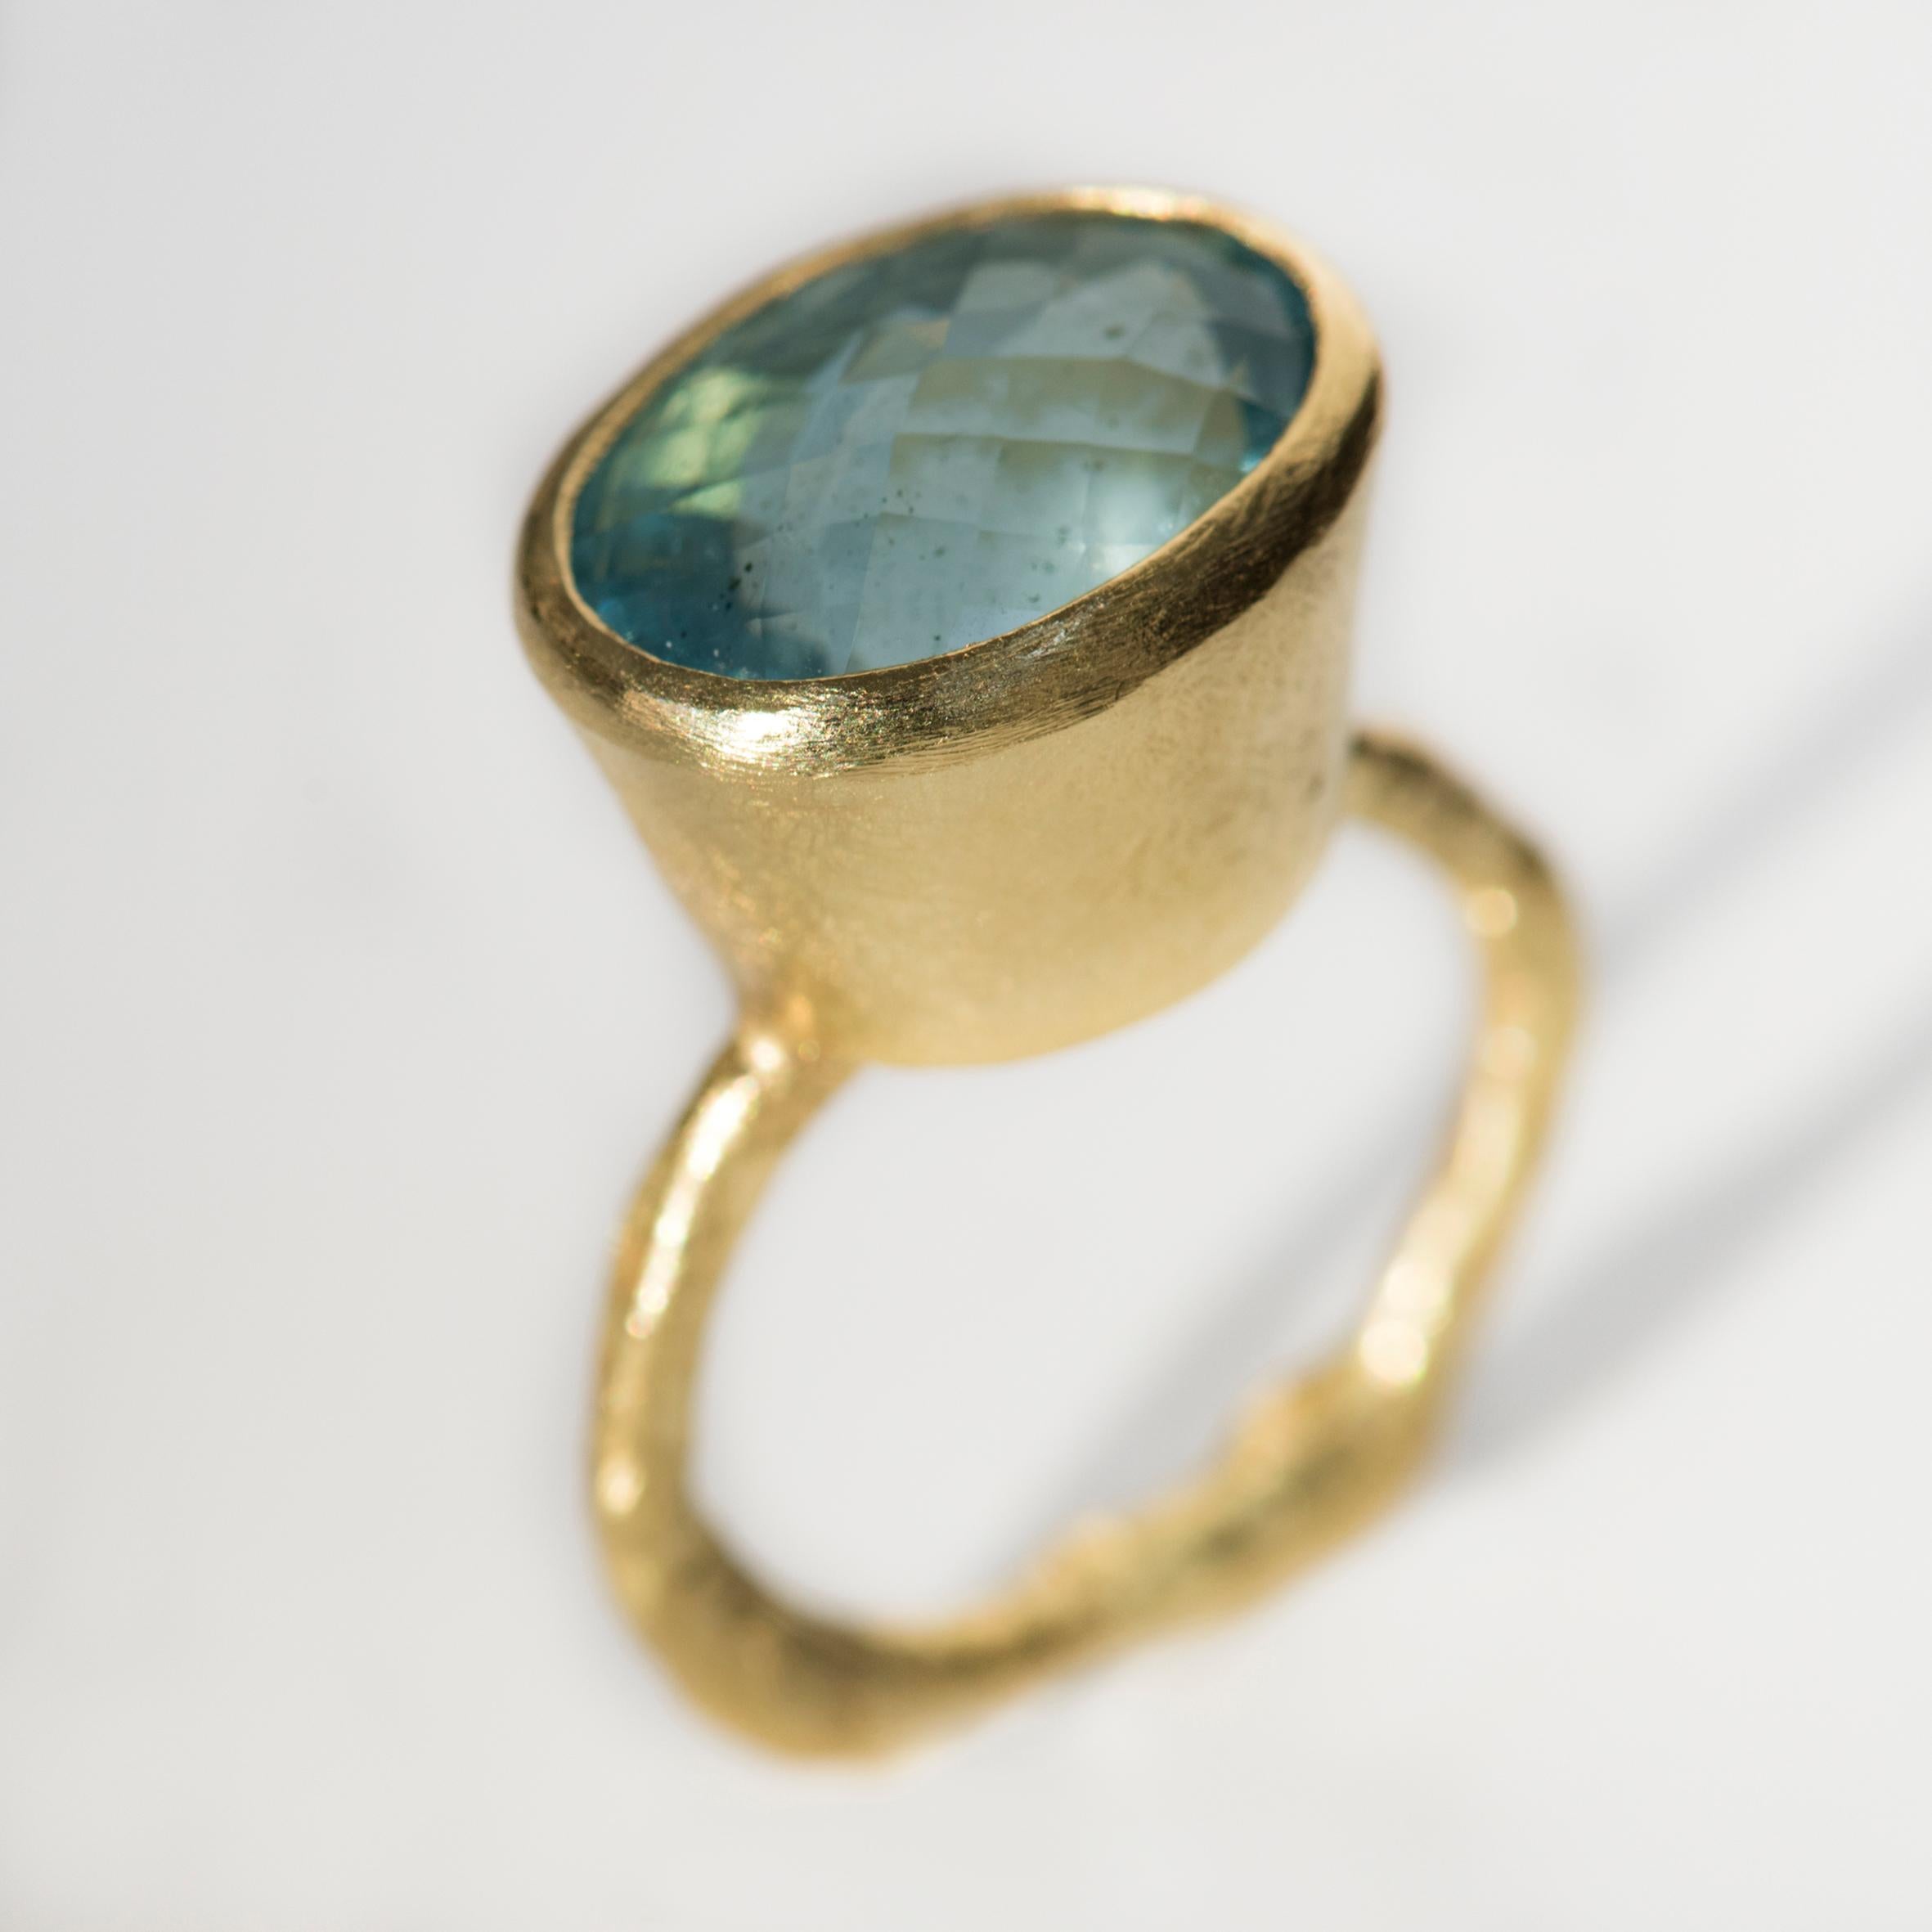 Deep Blue Aquamarine 18 Karat Gold Cocktail Ring Handmade by Disa Allsopp In New Condition For Sale In London, GB